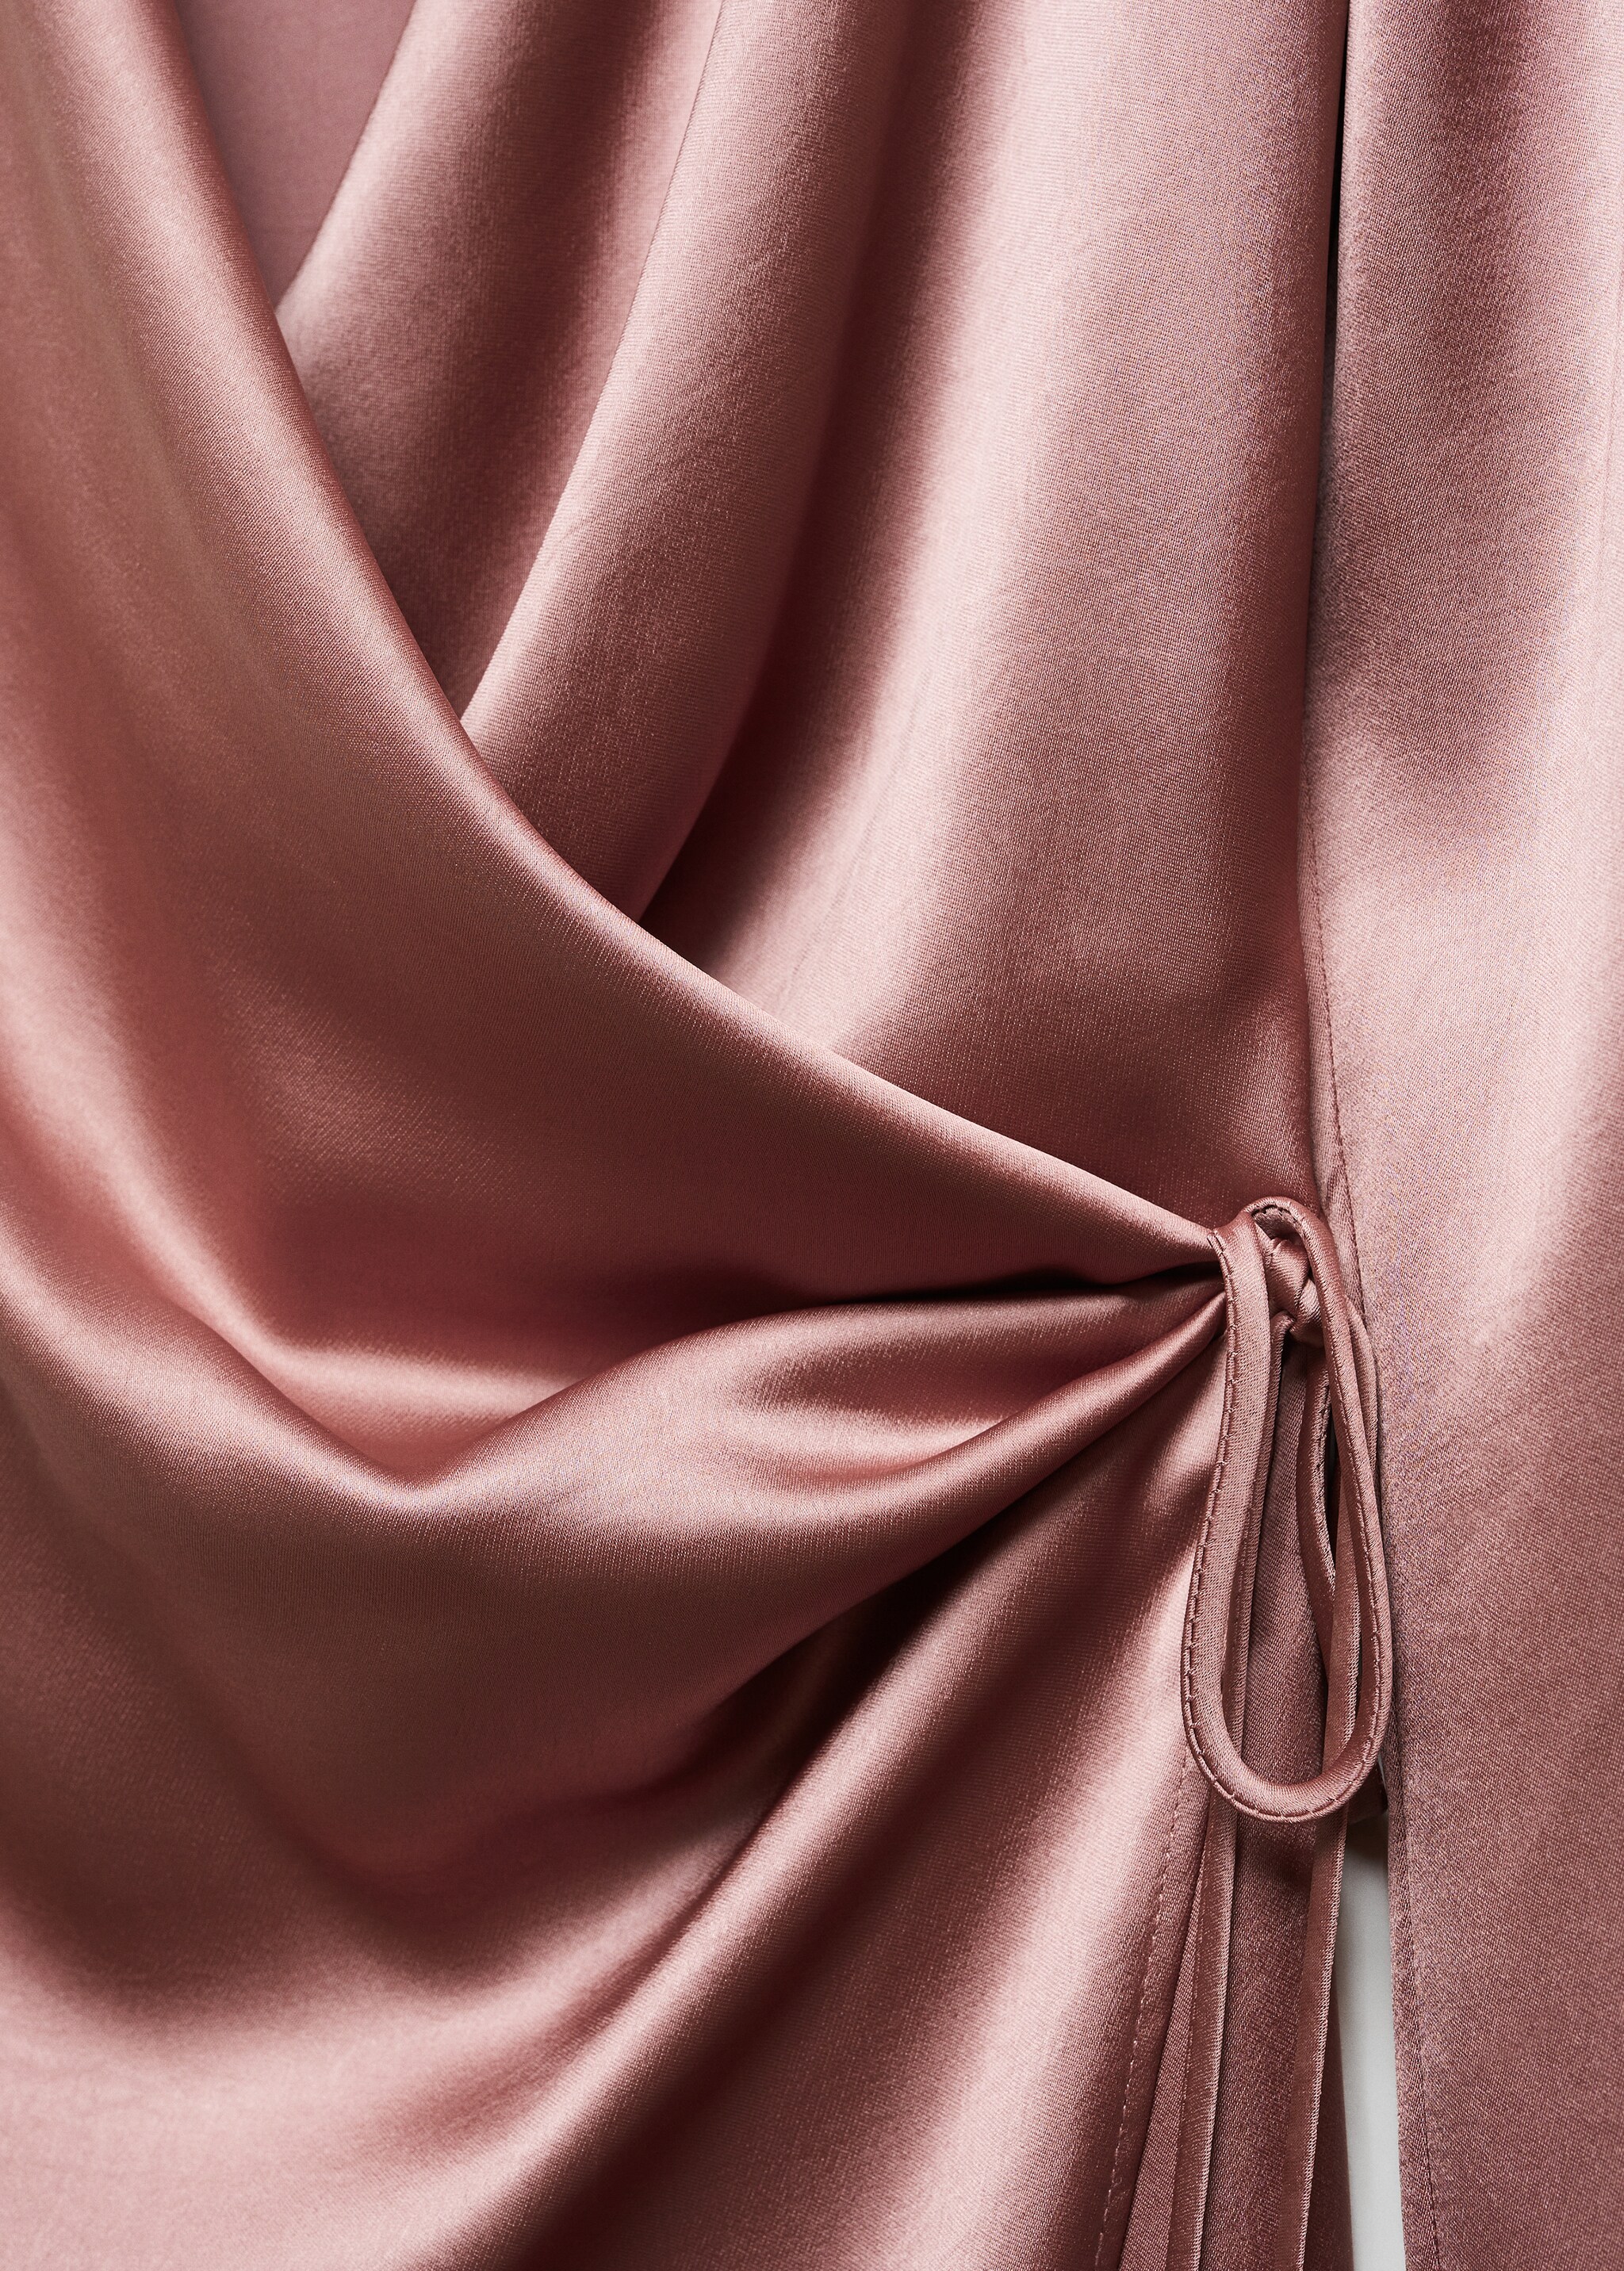 Wrapped satin dress - Details of the article 8